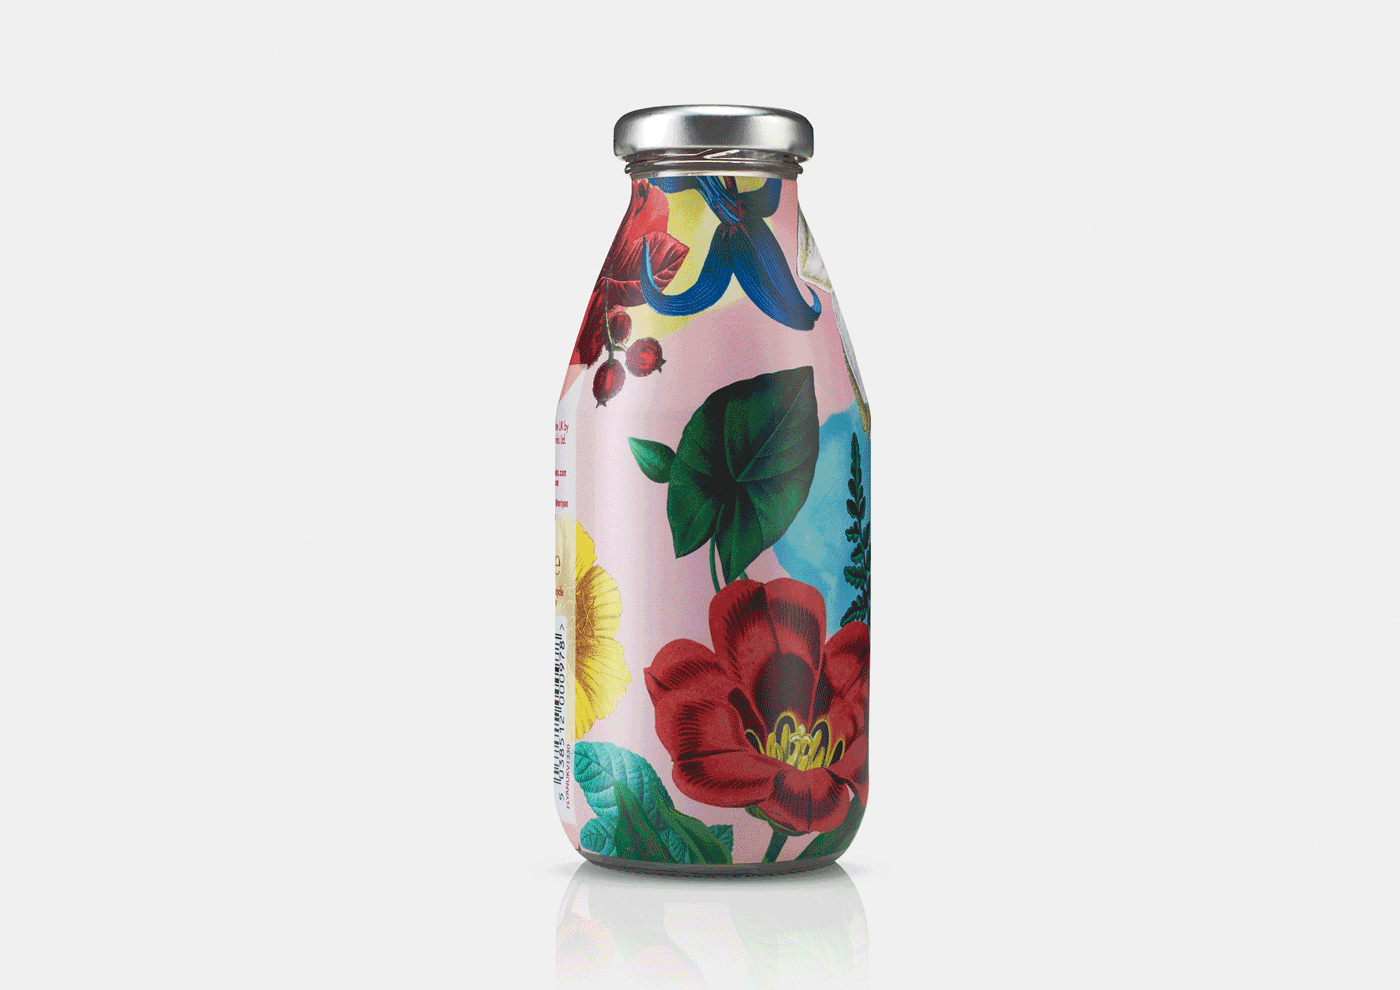 Packaging design by B&B Studio for Firefly and Mr Lyan non-alcoholic cocktail collaboration Superfly